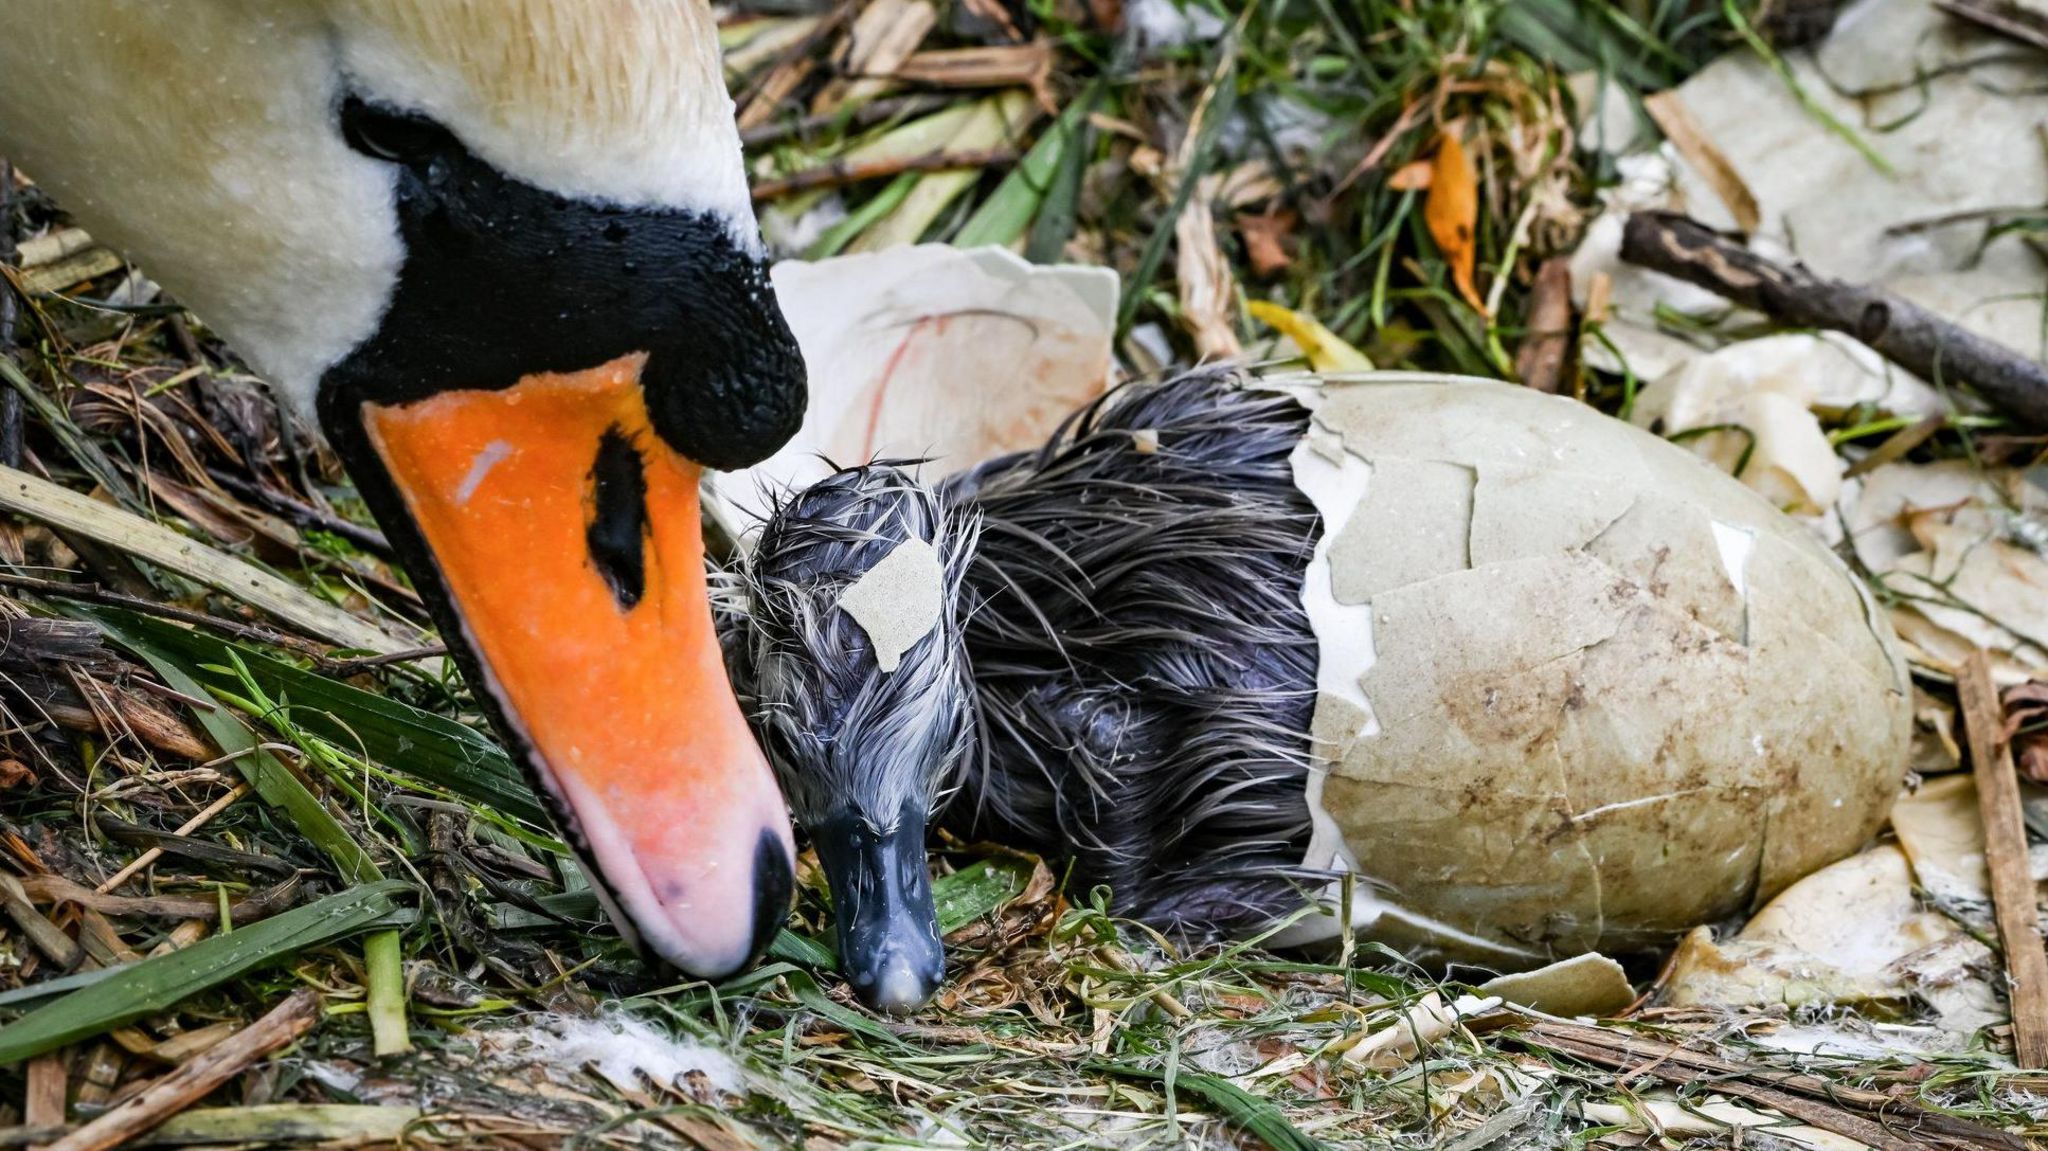 Swan and hatching cygnet